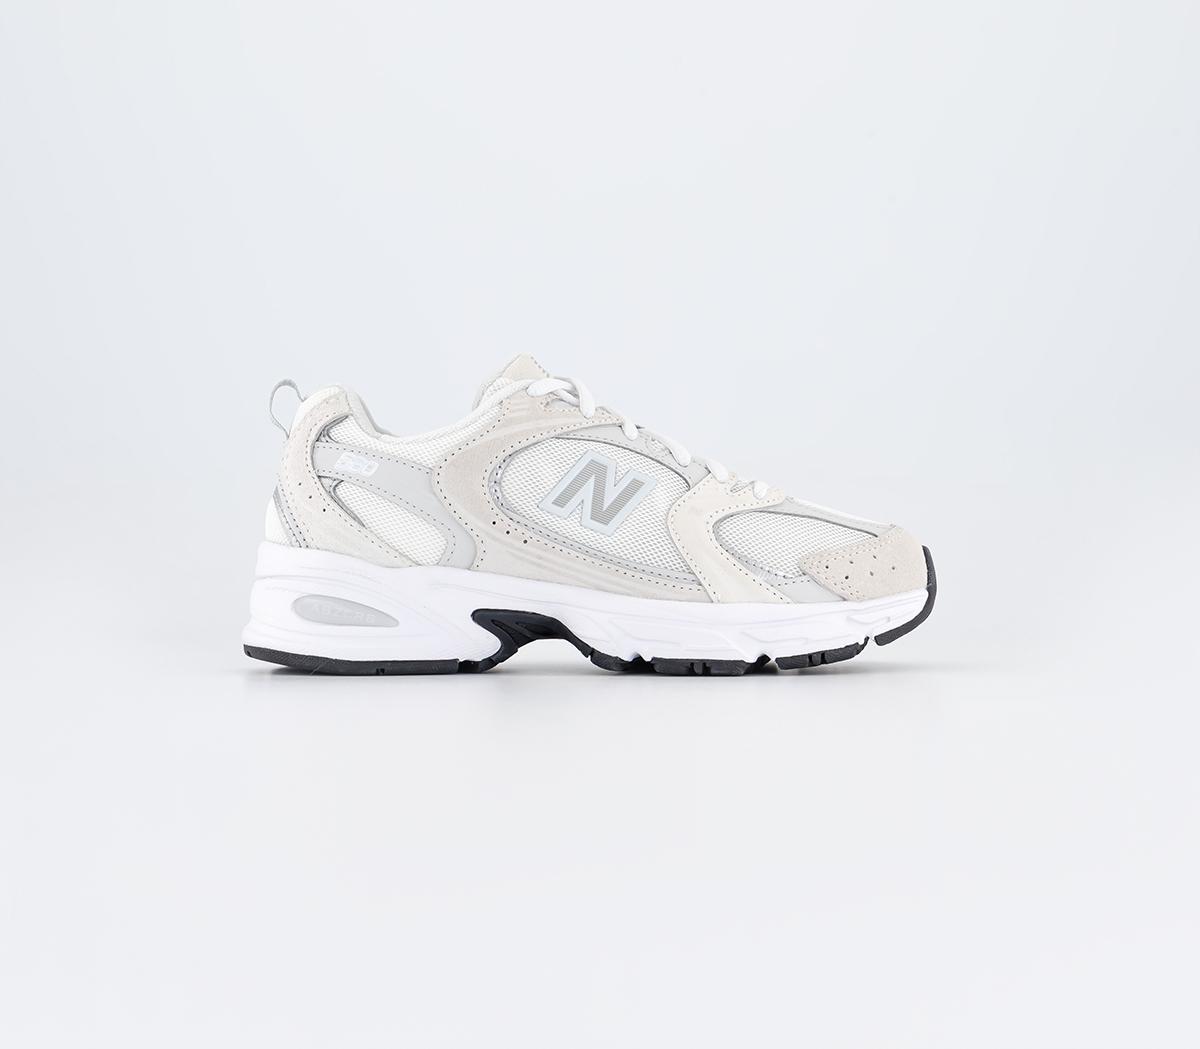 New Balance 530 sneakers in off white